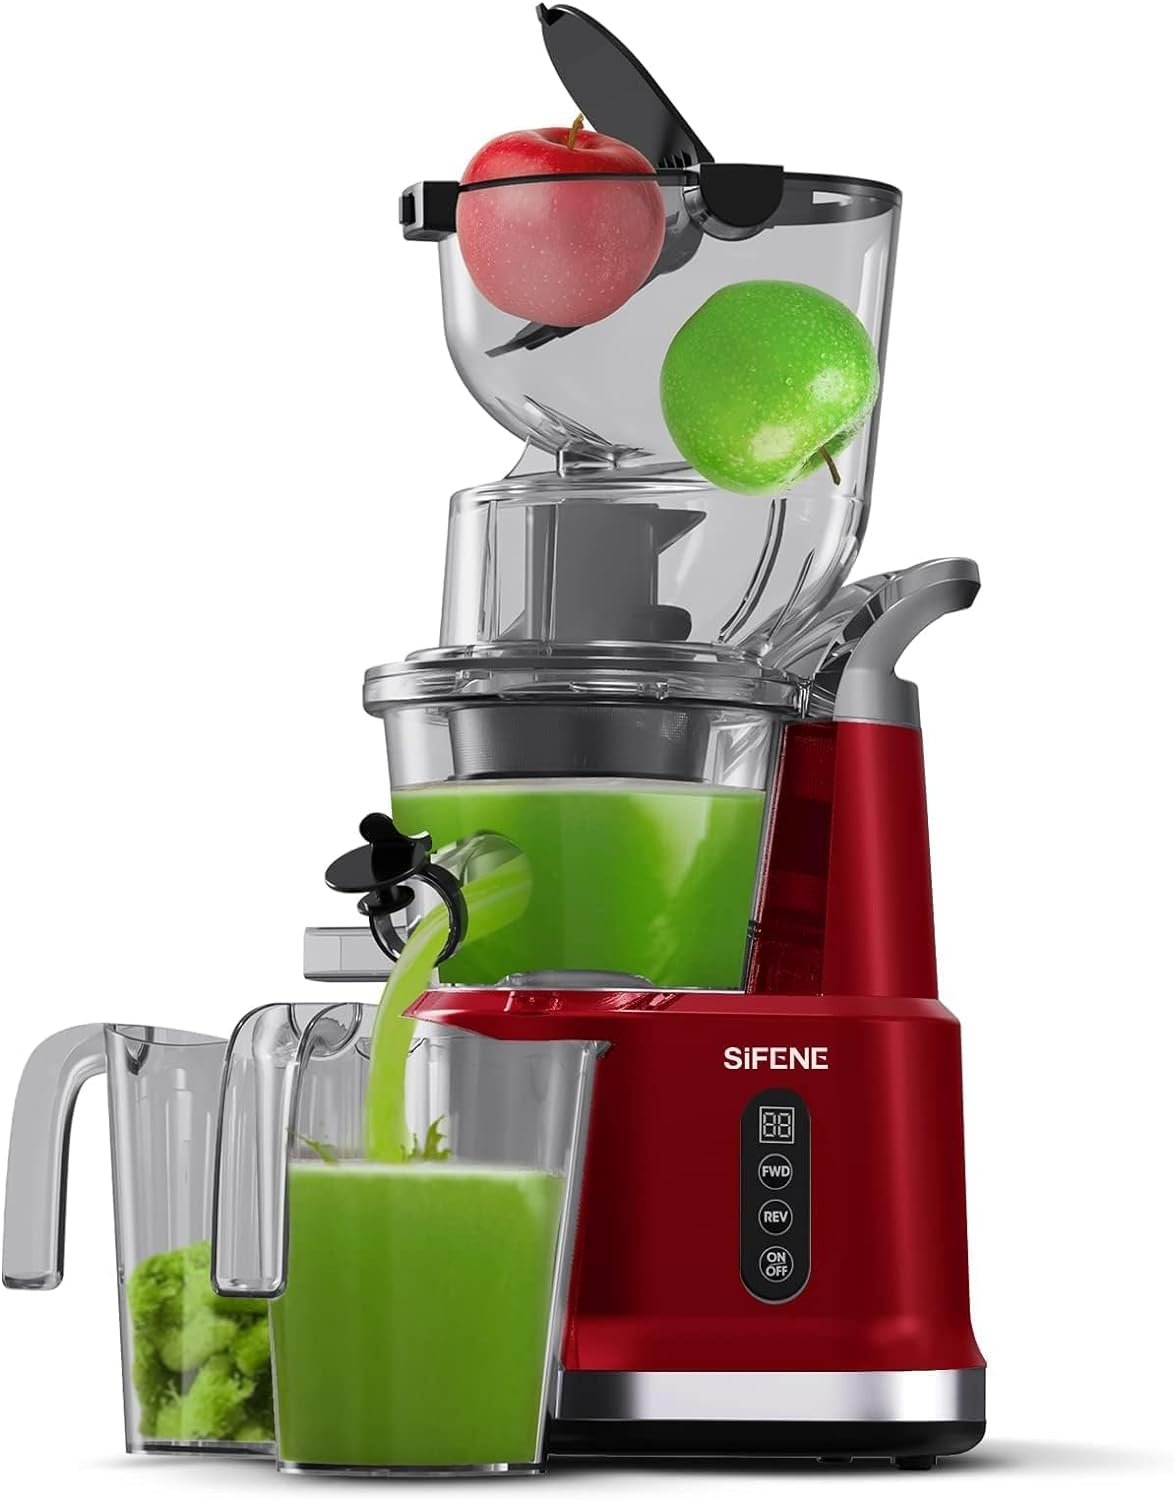 SIFENE Whole Juicer Machine Review